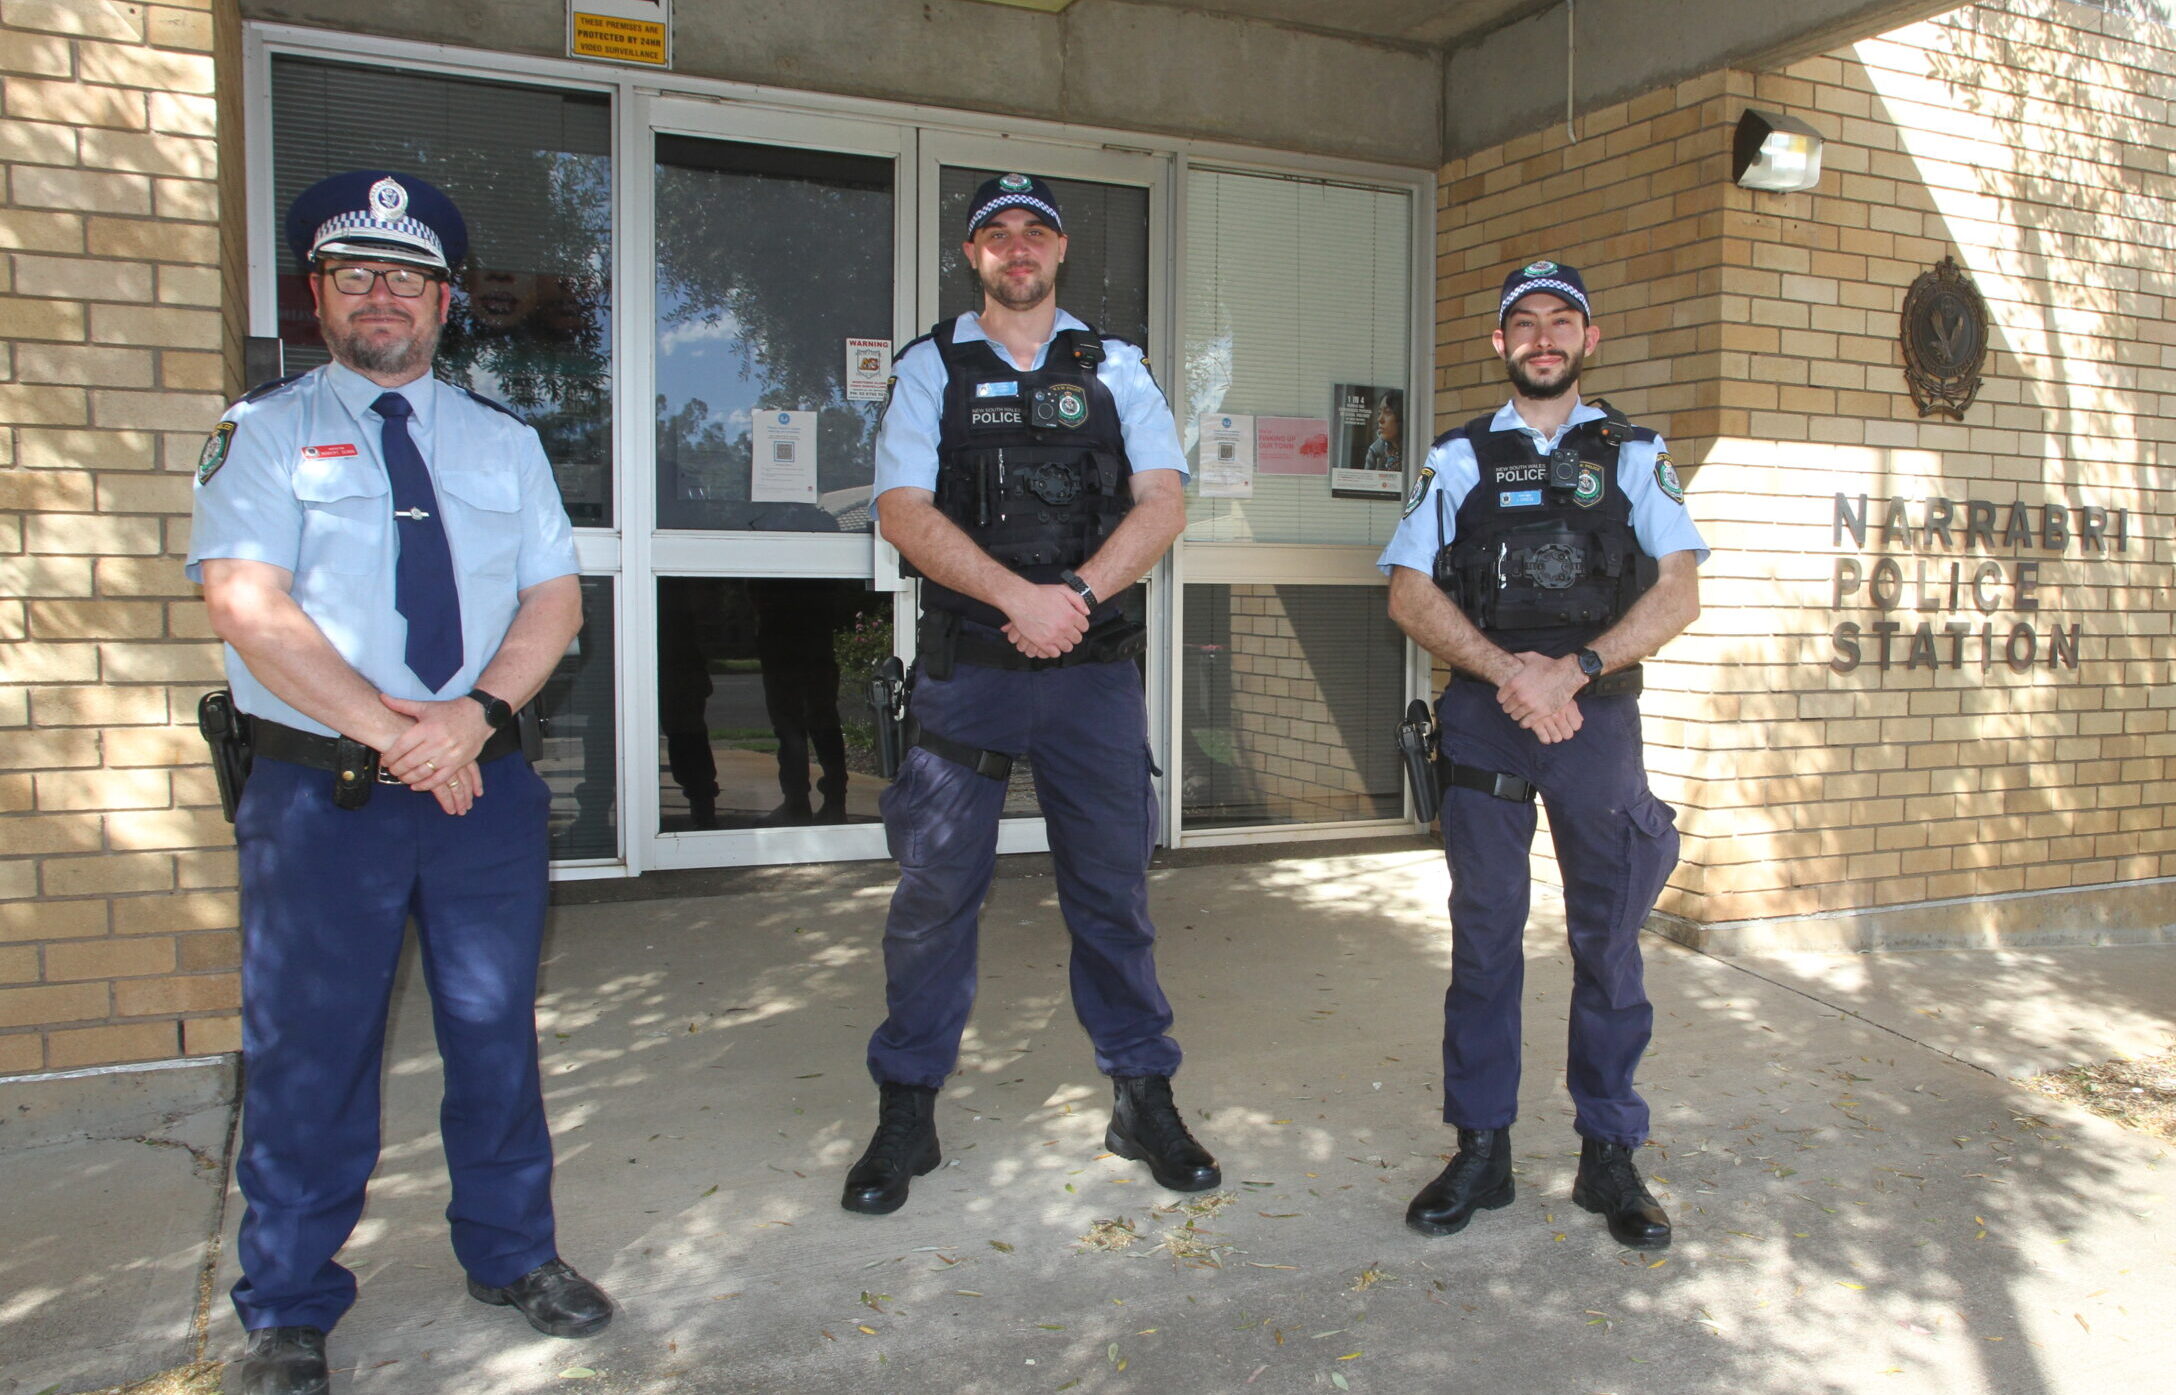 Narrabri’s newest police officers welcomed to town